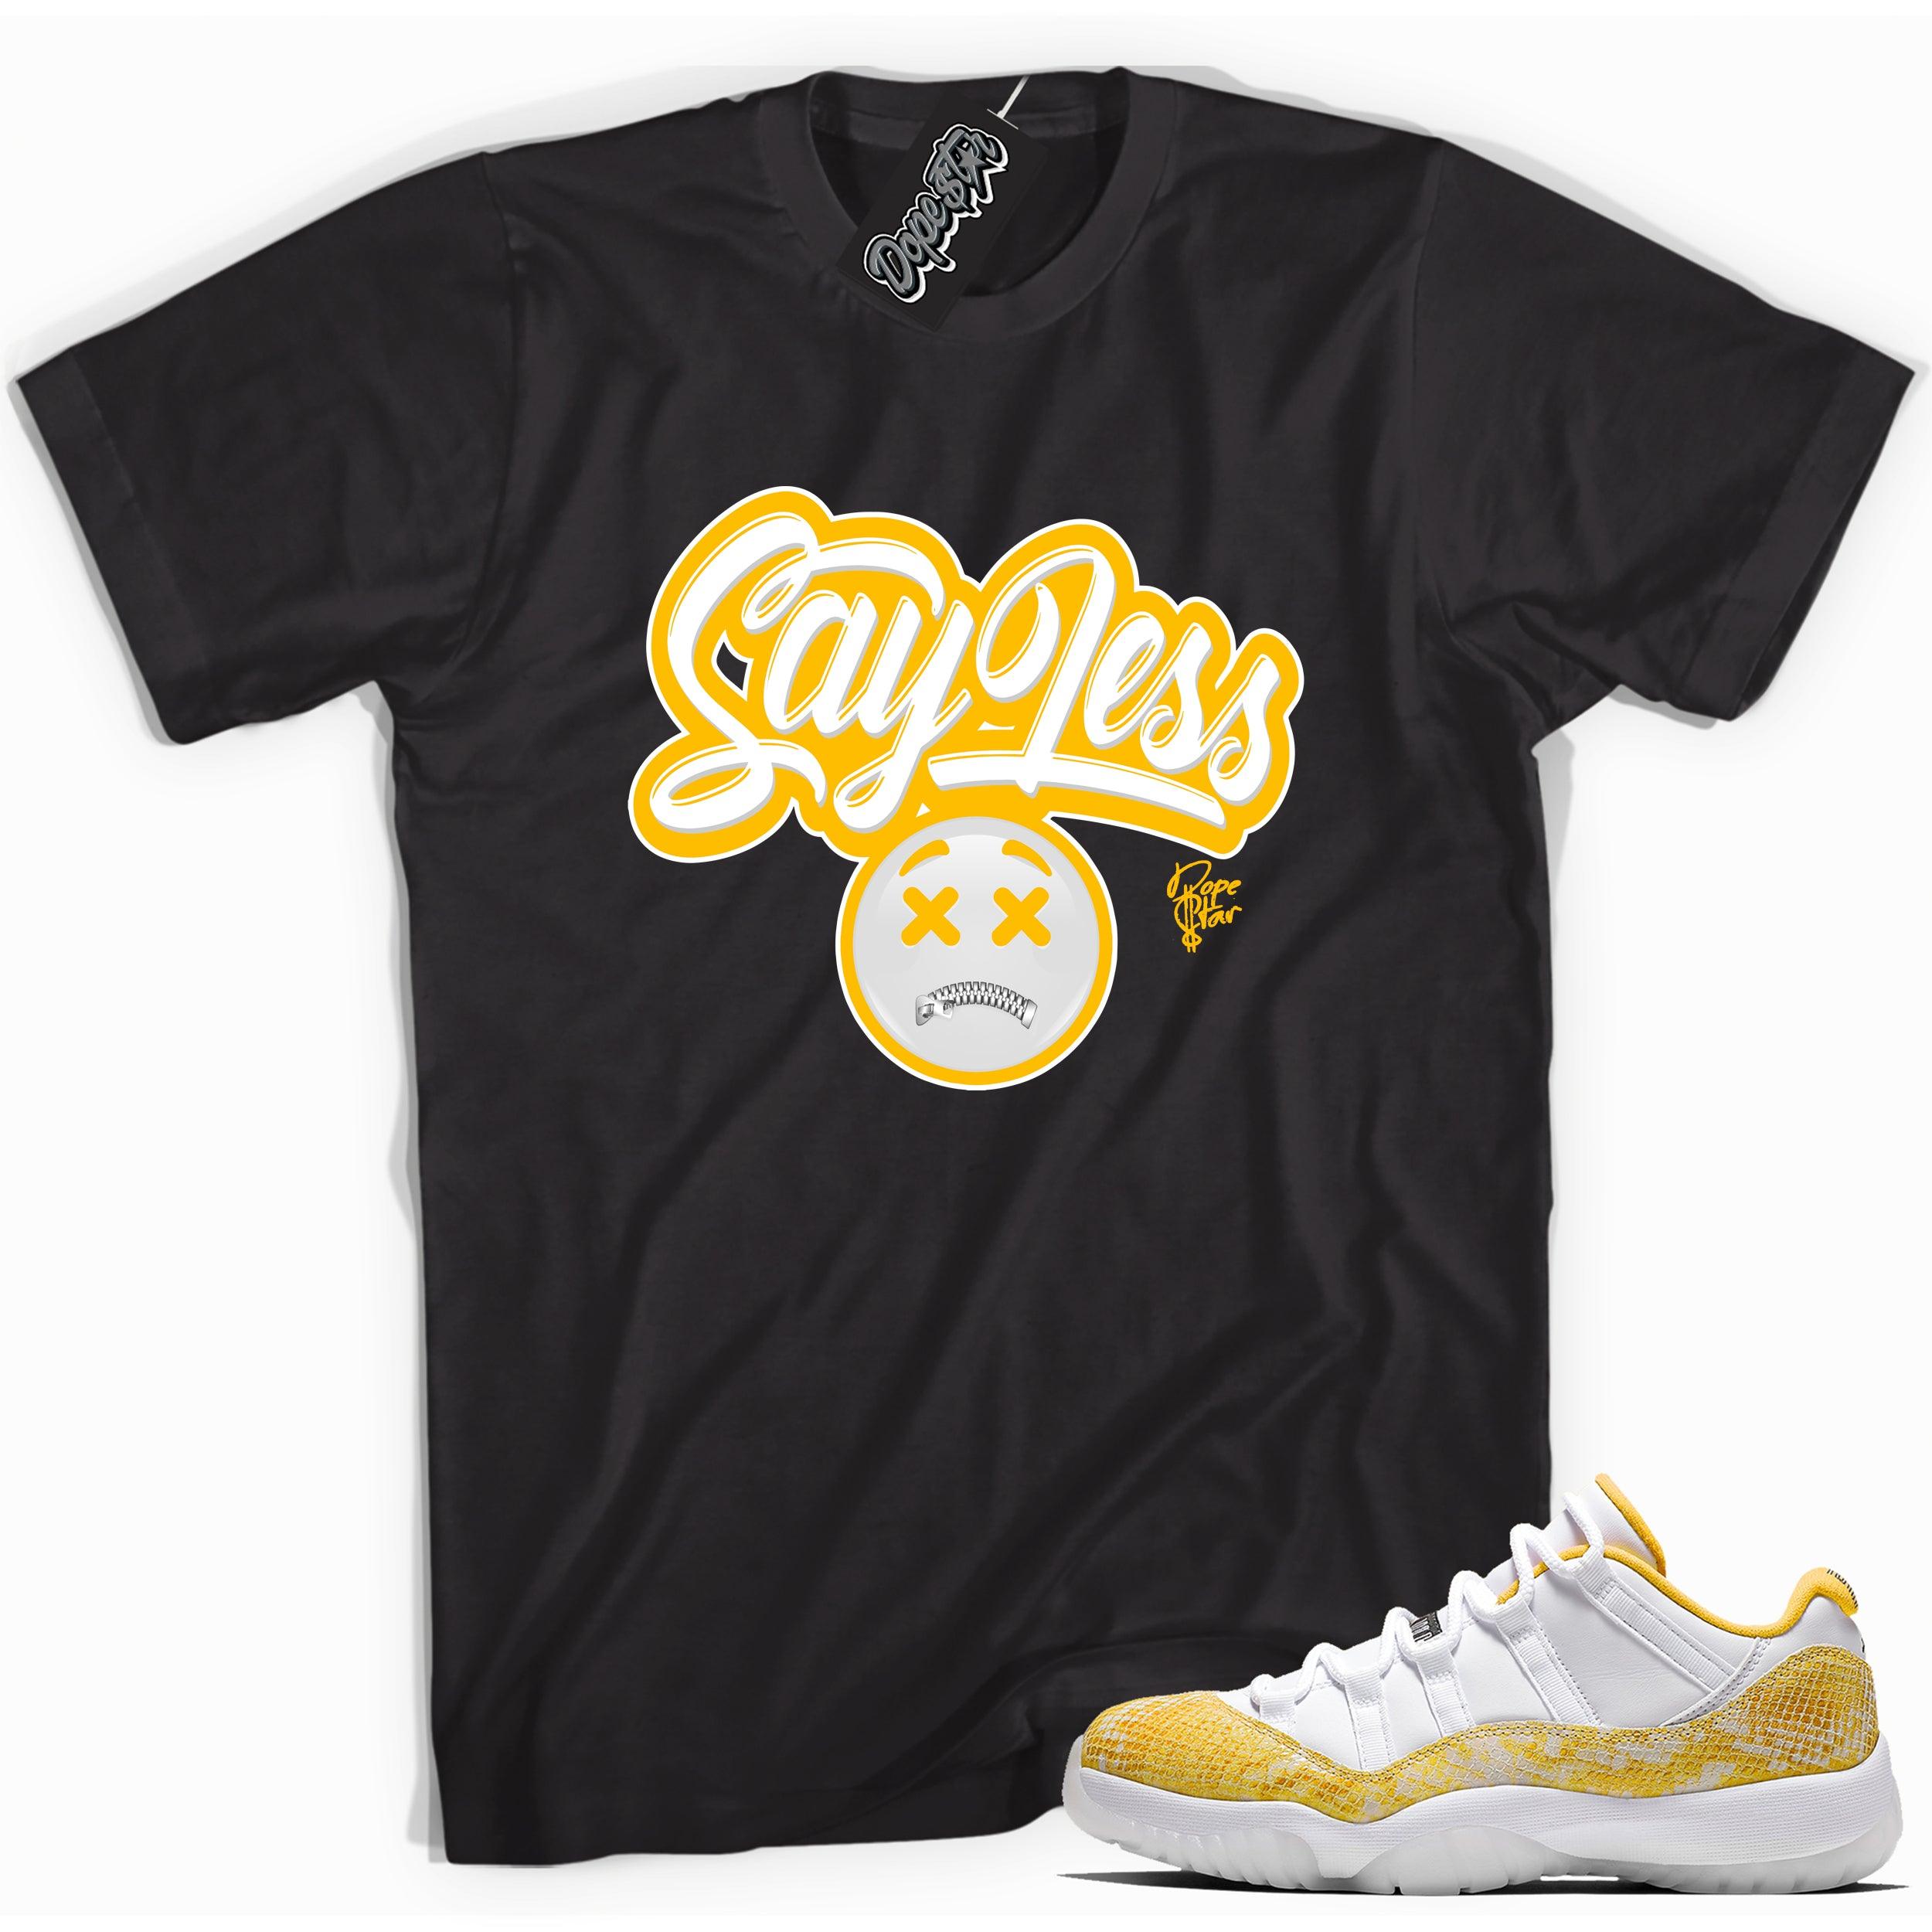 Cool black graphic tee with 'say less' print, that perfectly matches  Air Jordan 11 Retro Low Yellow Snakeskin sneakers